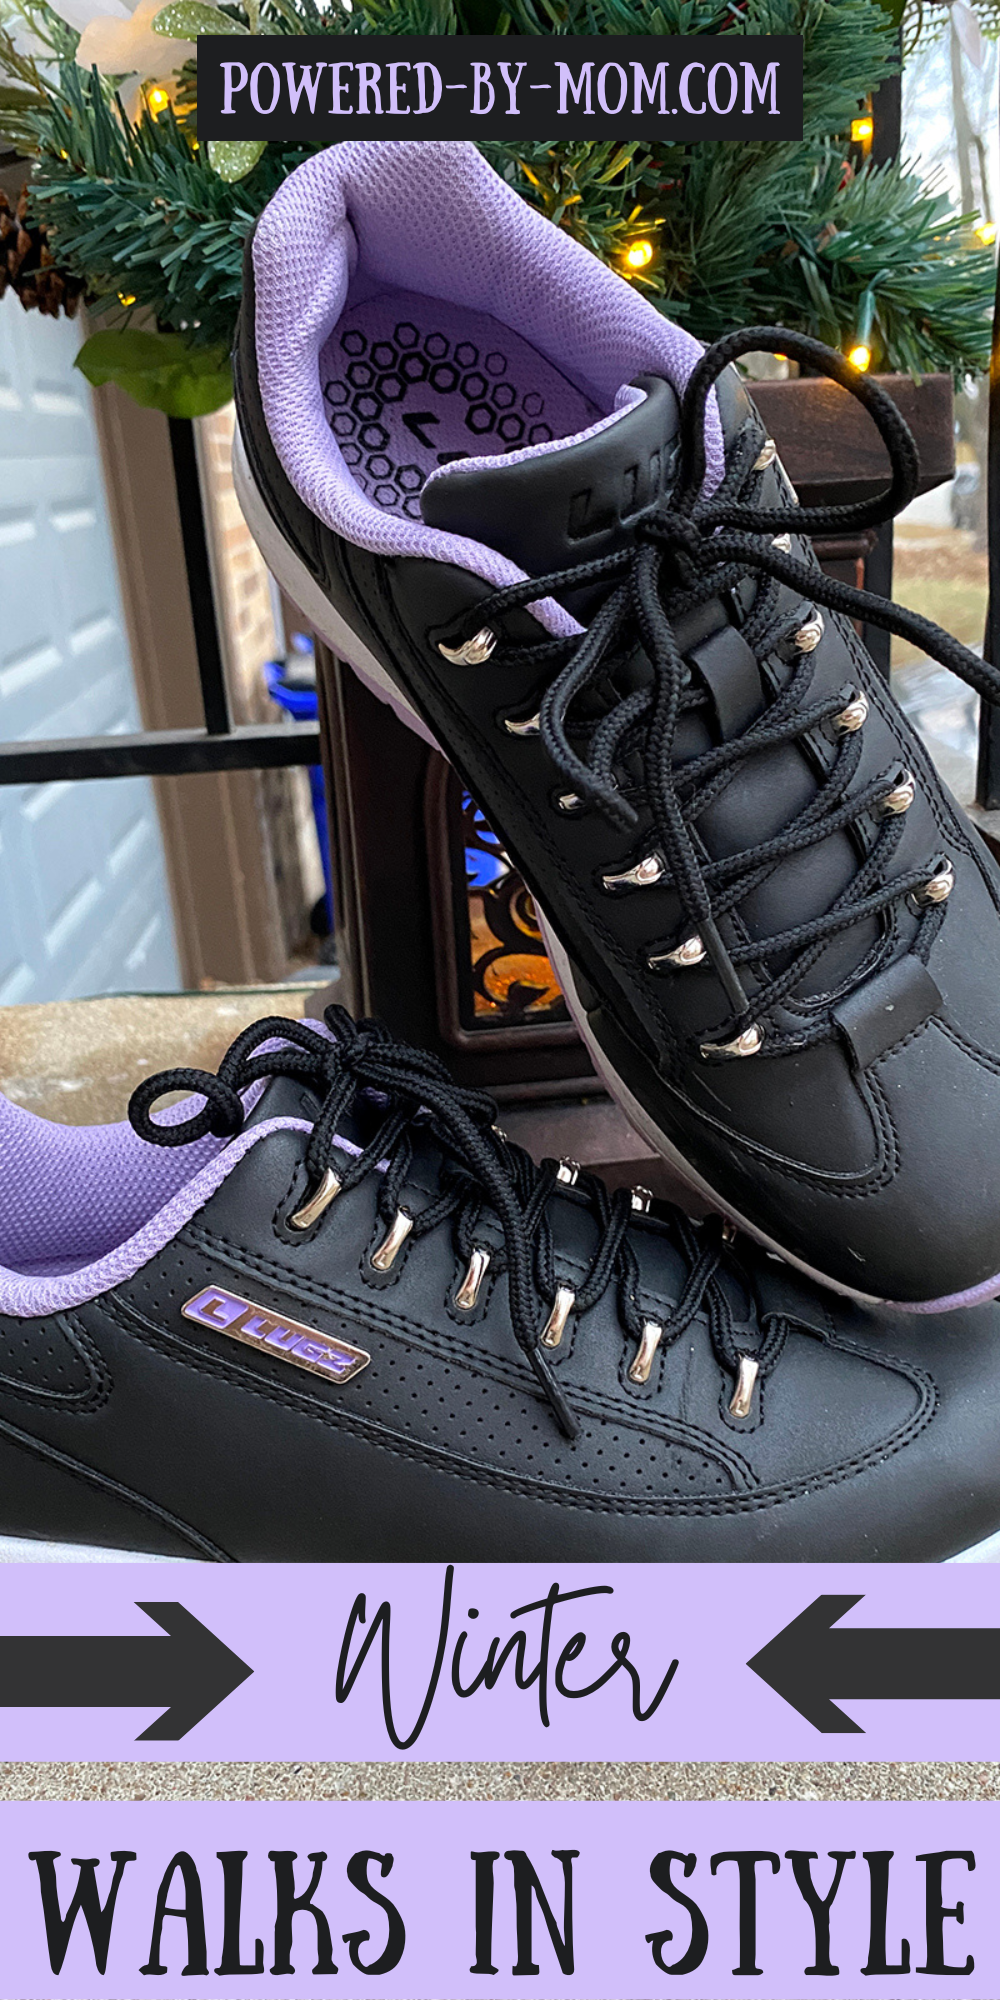 Walking in winter can be tricky with icy walkways, but Lugz makes sneakers that will keep you on your feet and comfortable year round.